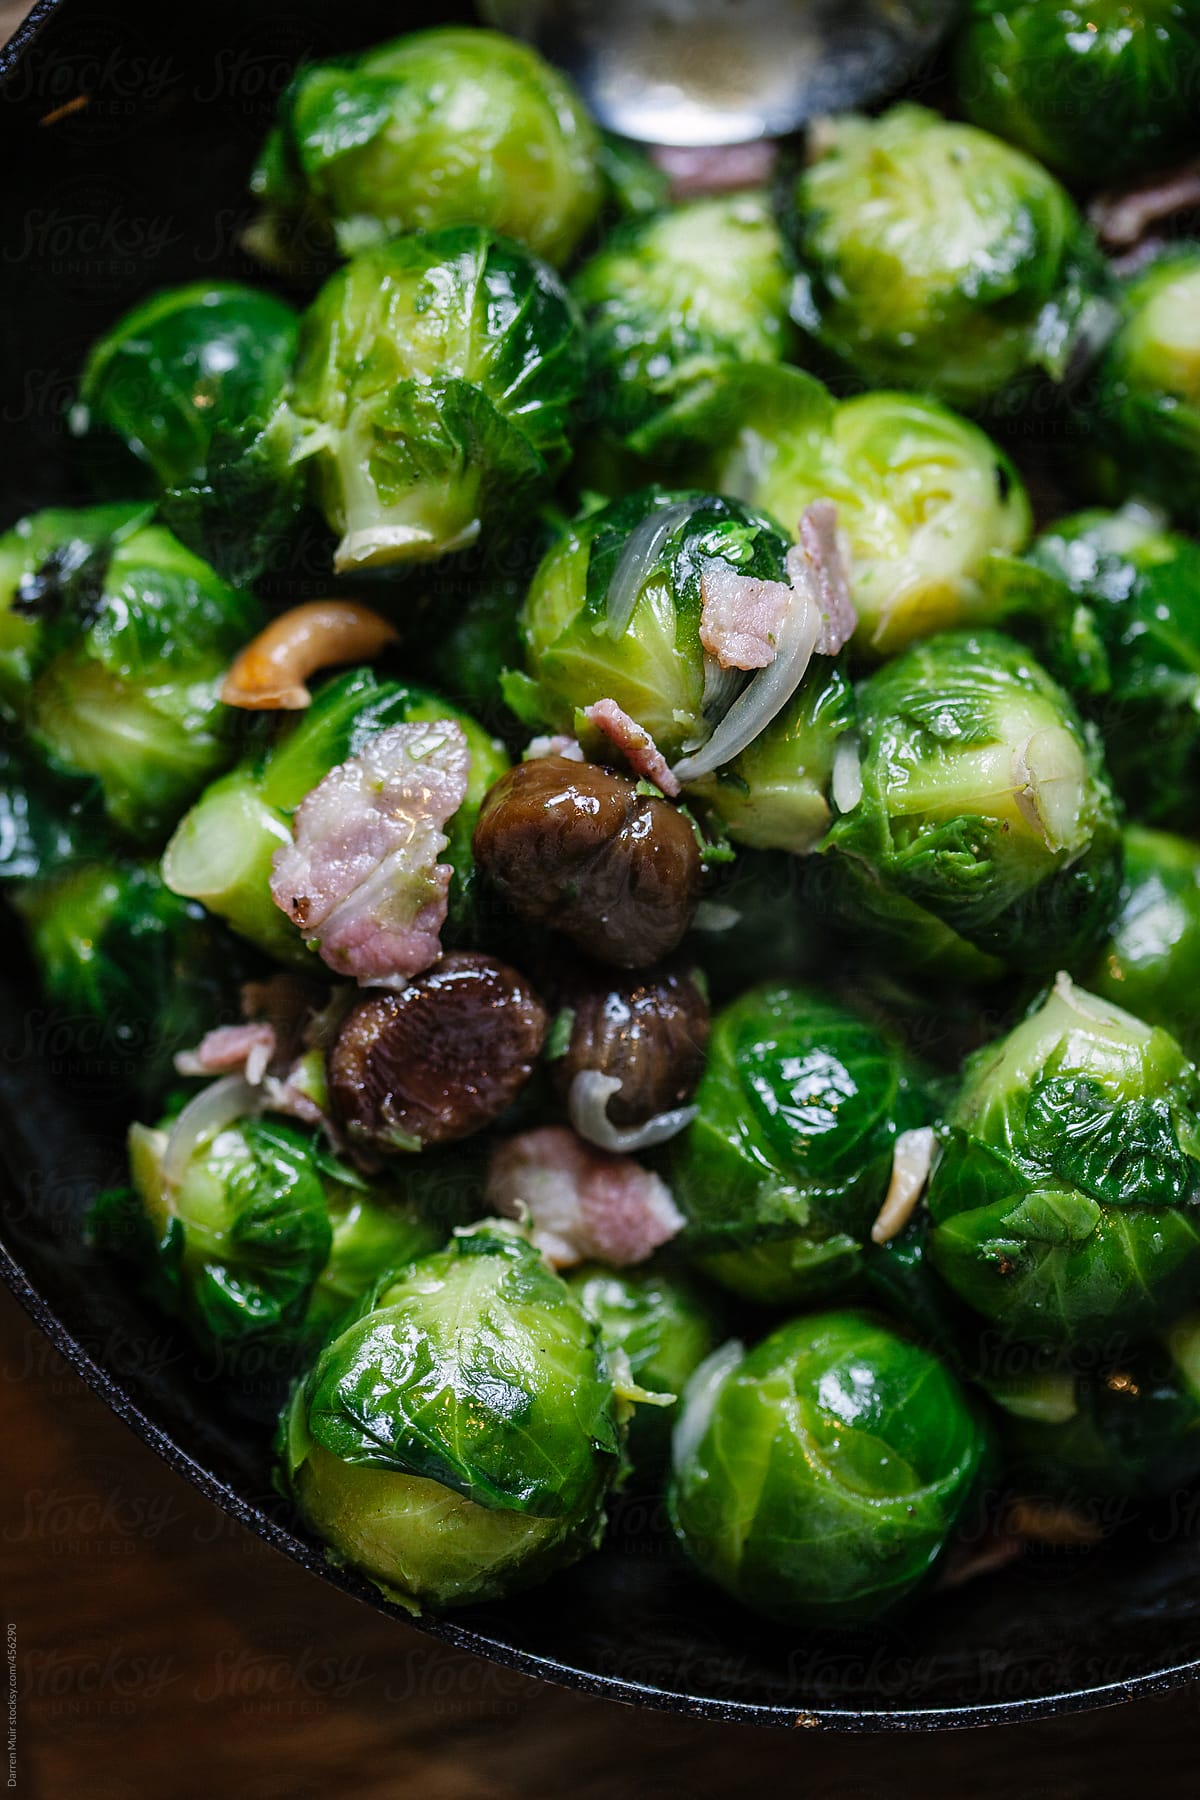 Cooking sprouts.